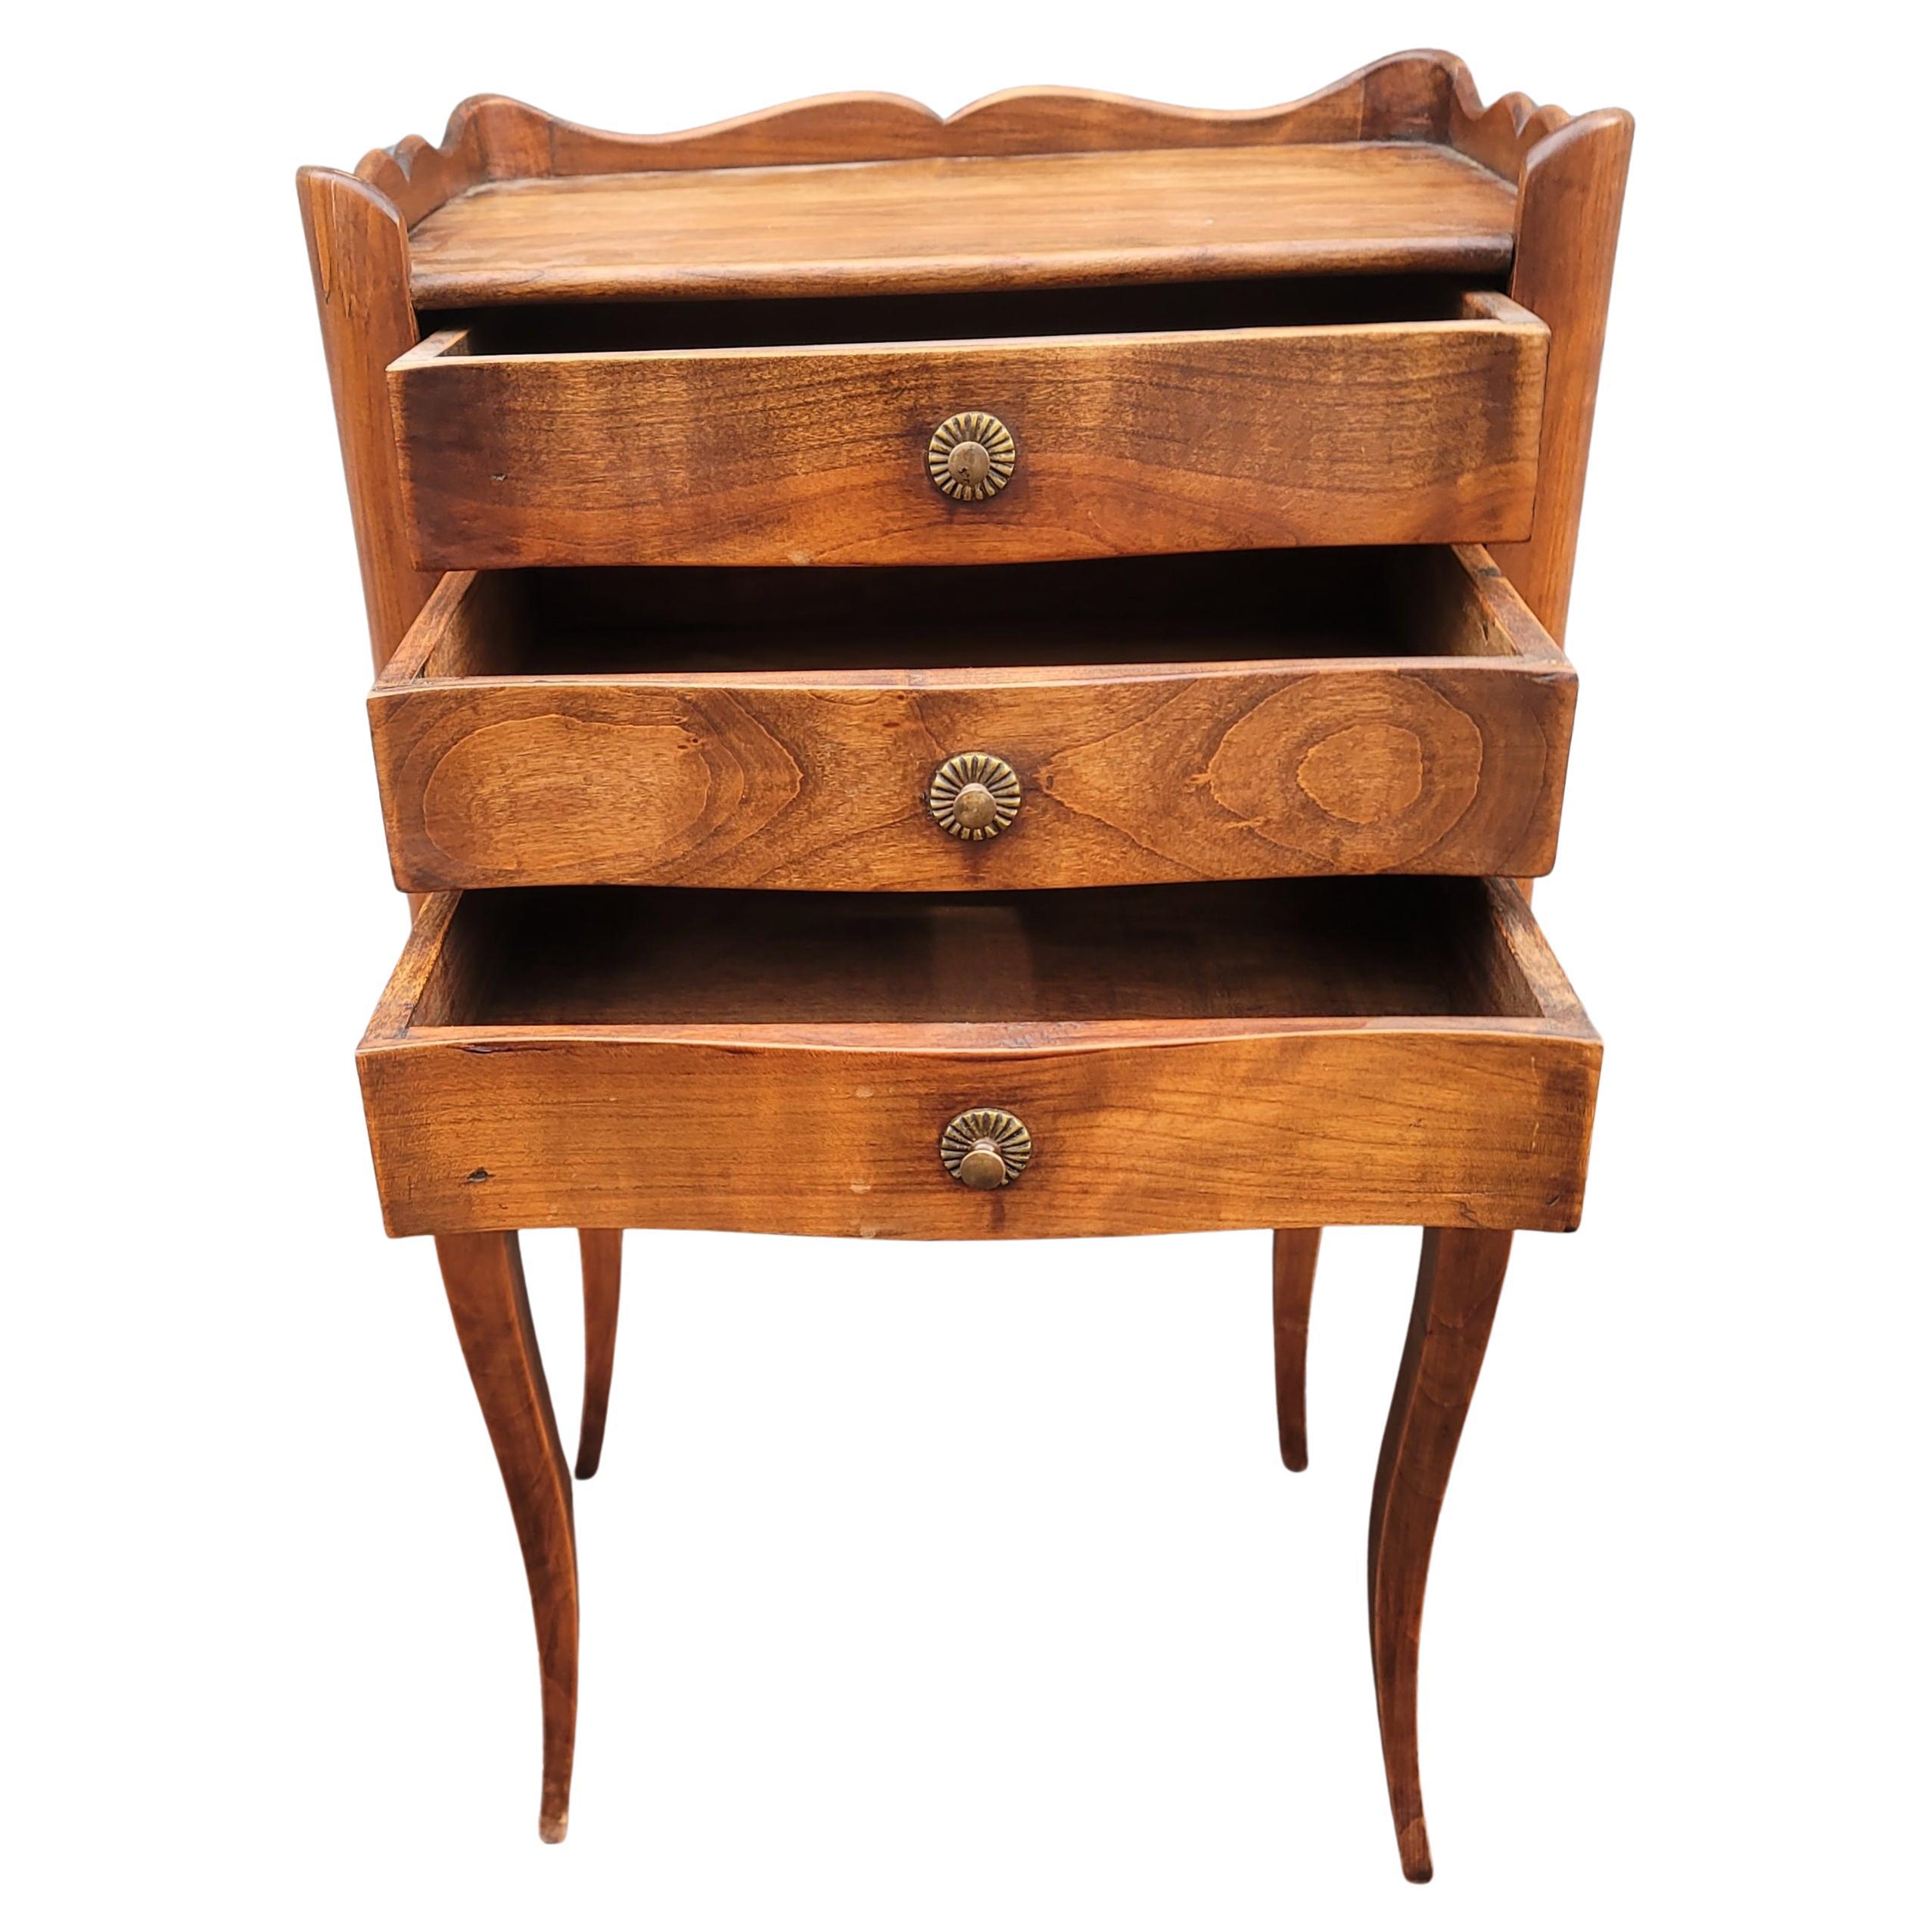 20th Century 1940s French Refinished Walnut Three Drawer Bedside Table Nightstand For Sale